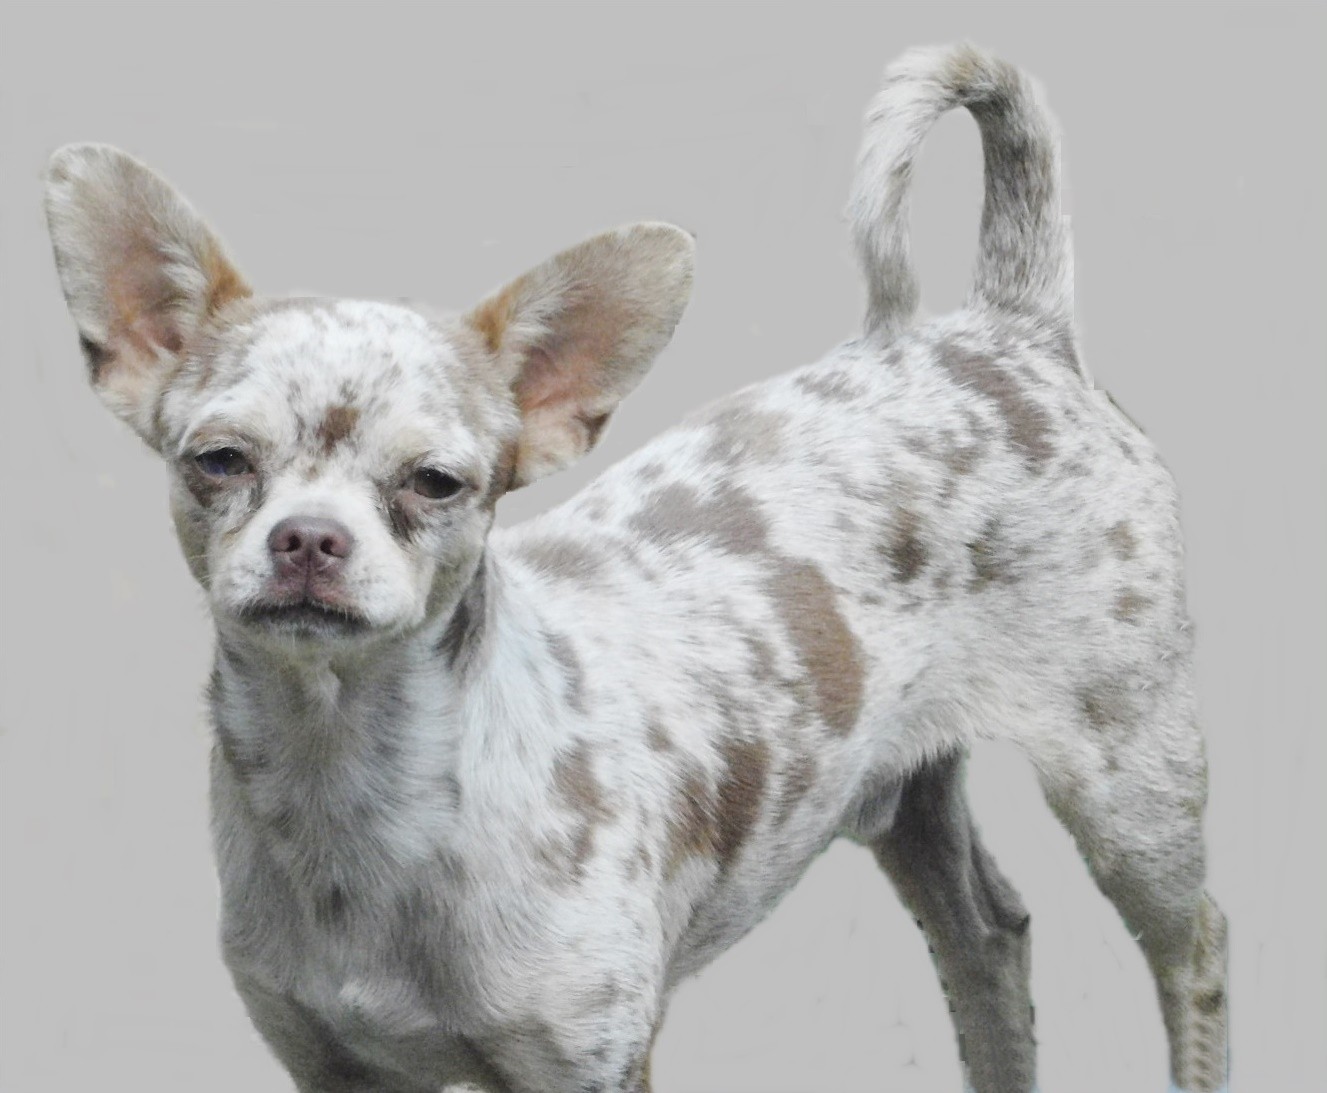 Long and short coat Chihuahua puppies for sale in Arkansas
Merle Chihuahua puppies for sale